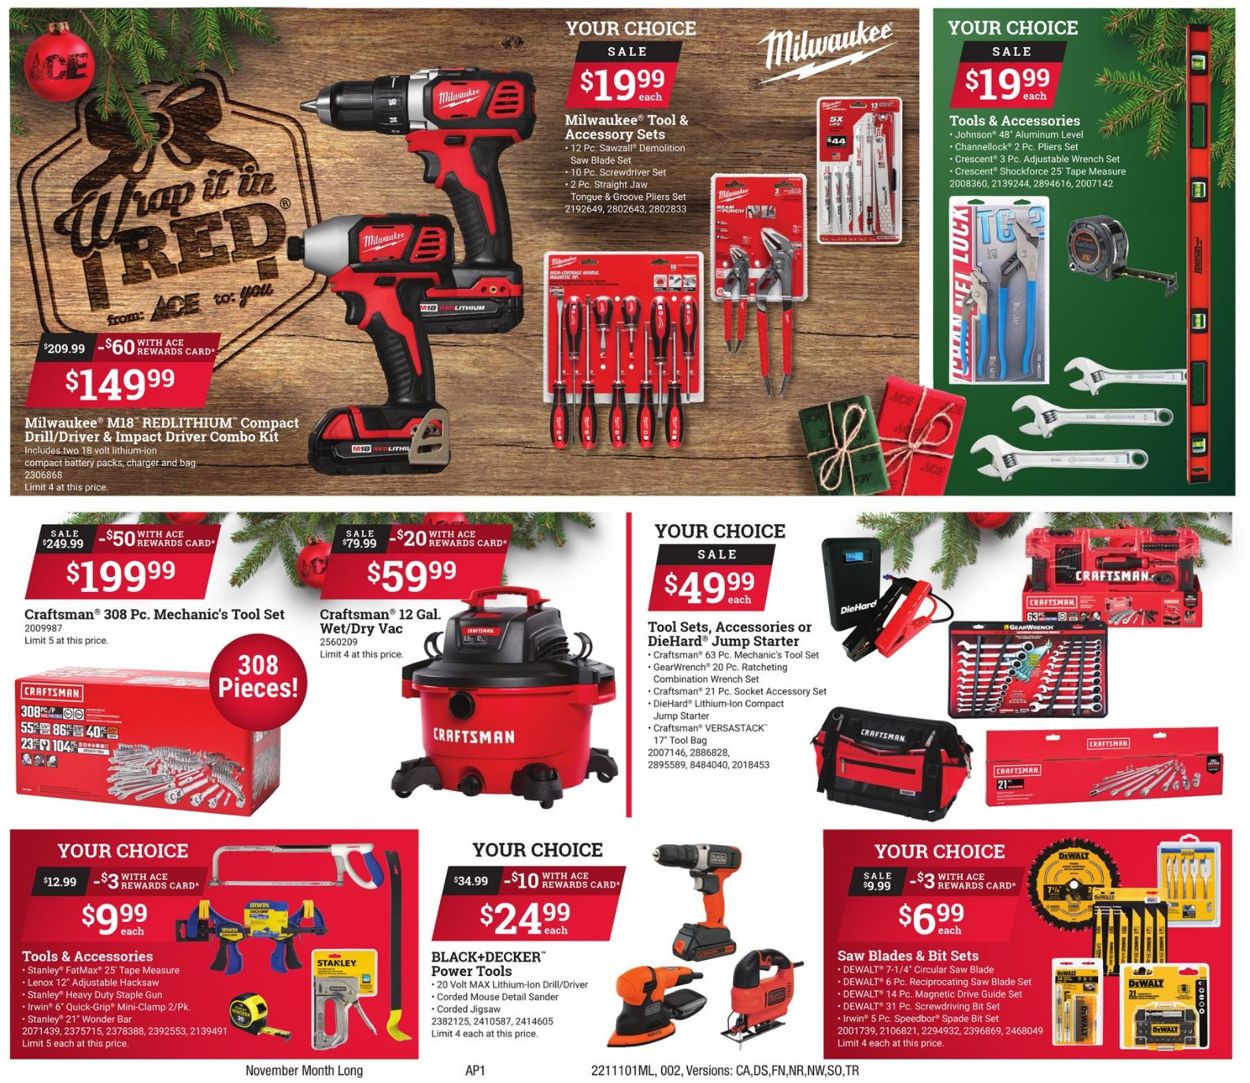 Ace Hardware HOLIDAY 2021 Current weekly ad 11/01 11/30/2021 [2